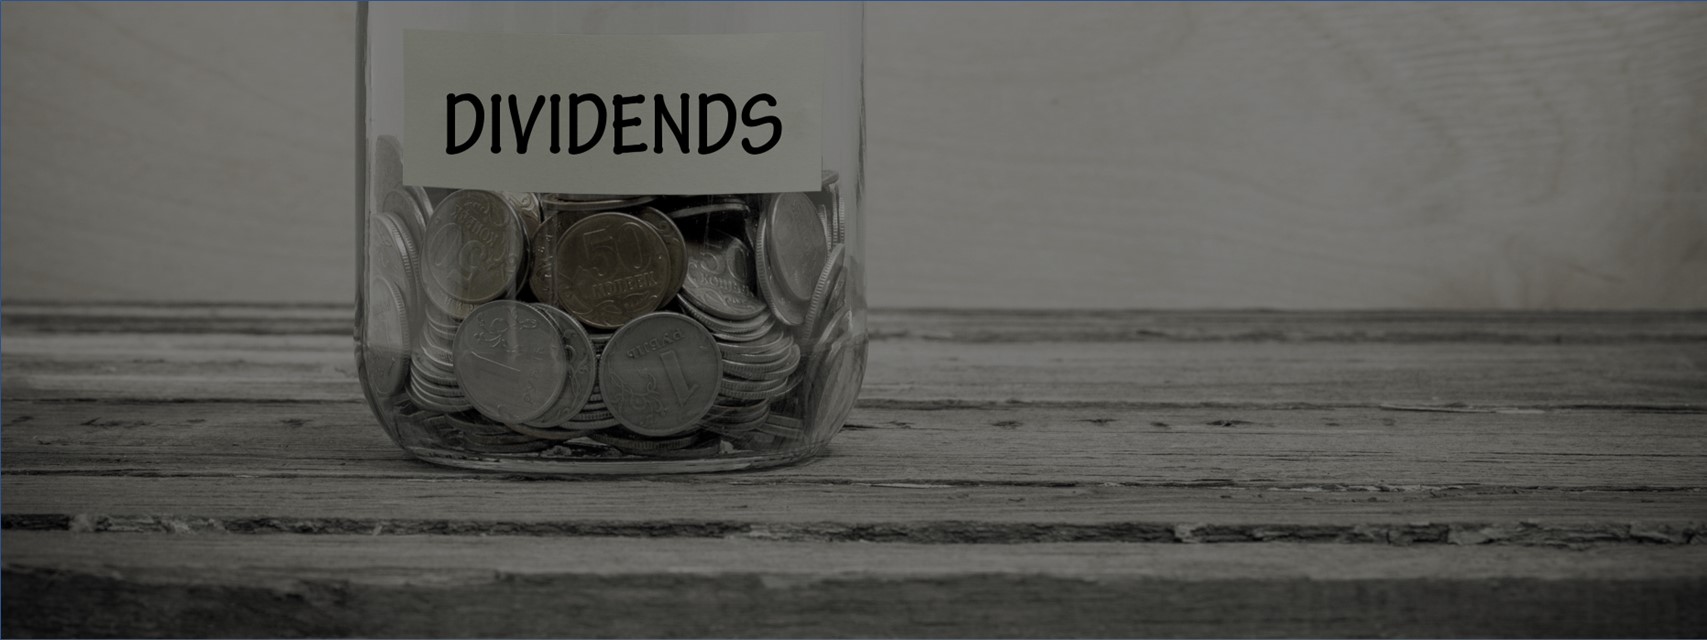 Glass jar filled with coins and labelled "Dividends"